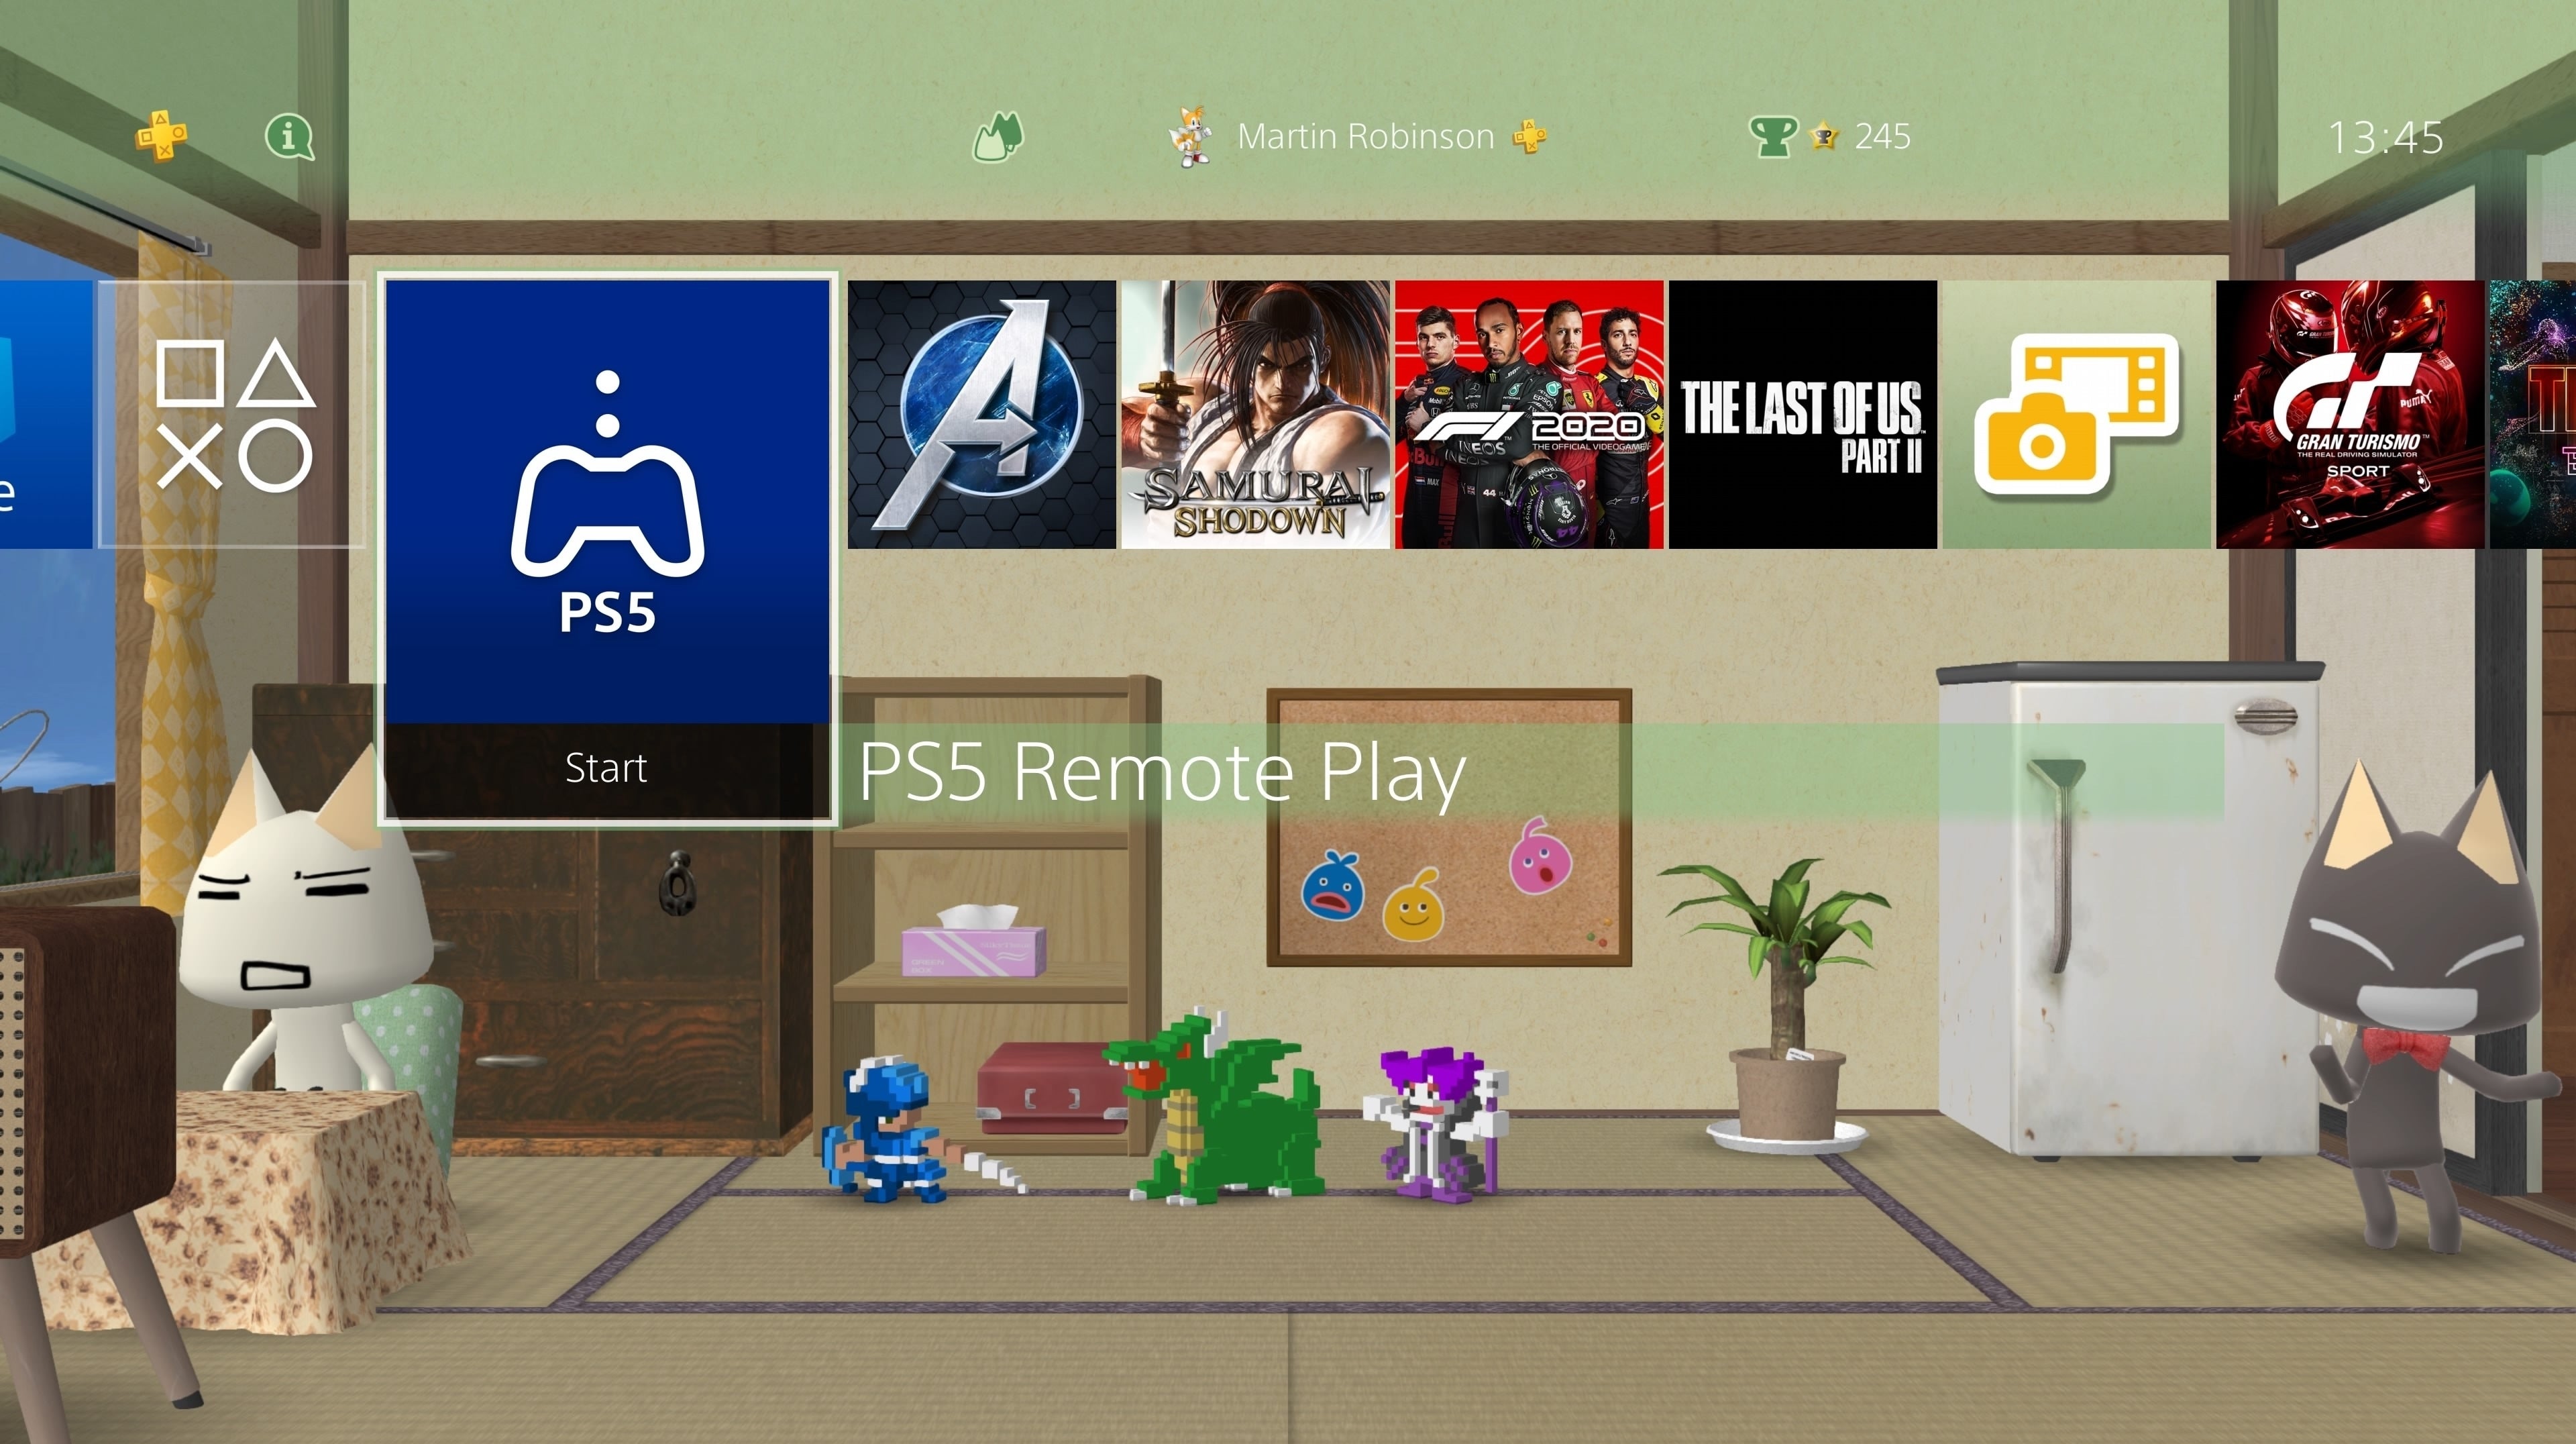 Image for You can play PS5 games on PS4 using a DualShock via Remote Play